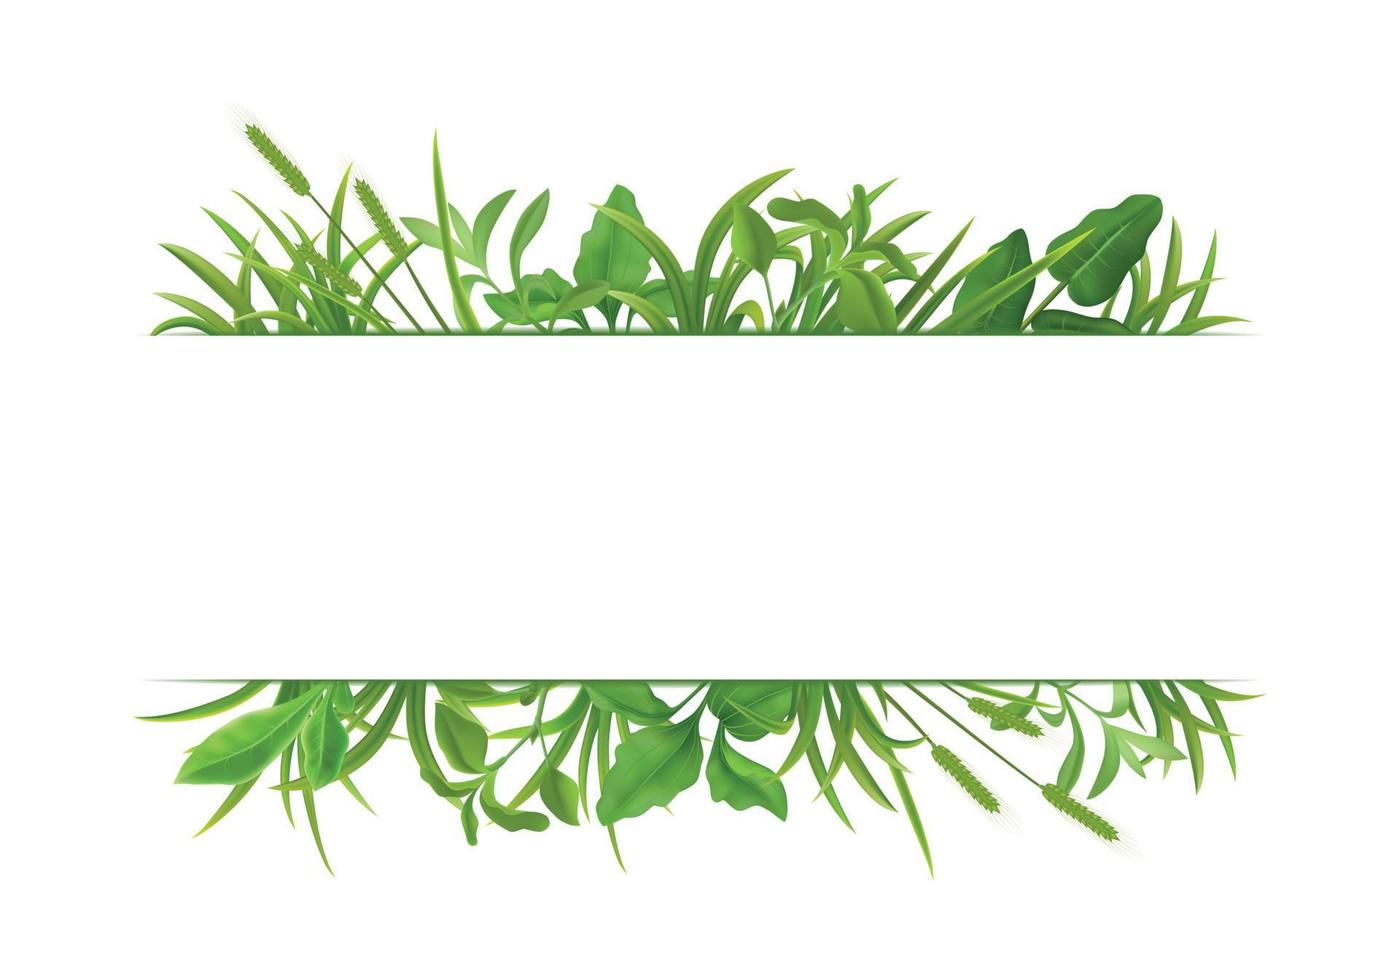 Grass Leaves Realistic Border vector